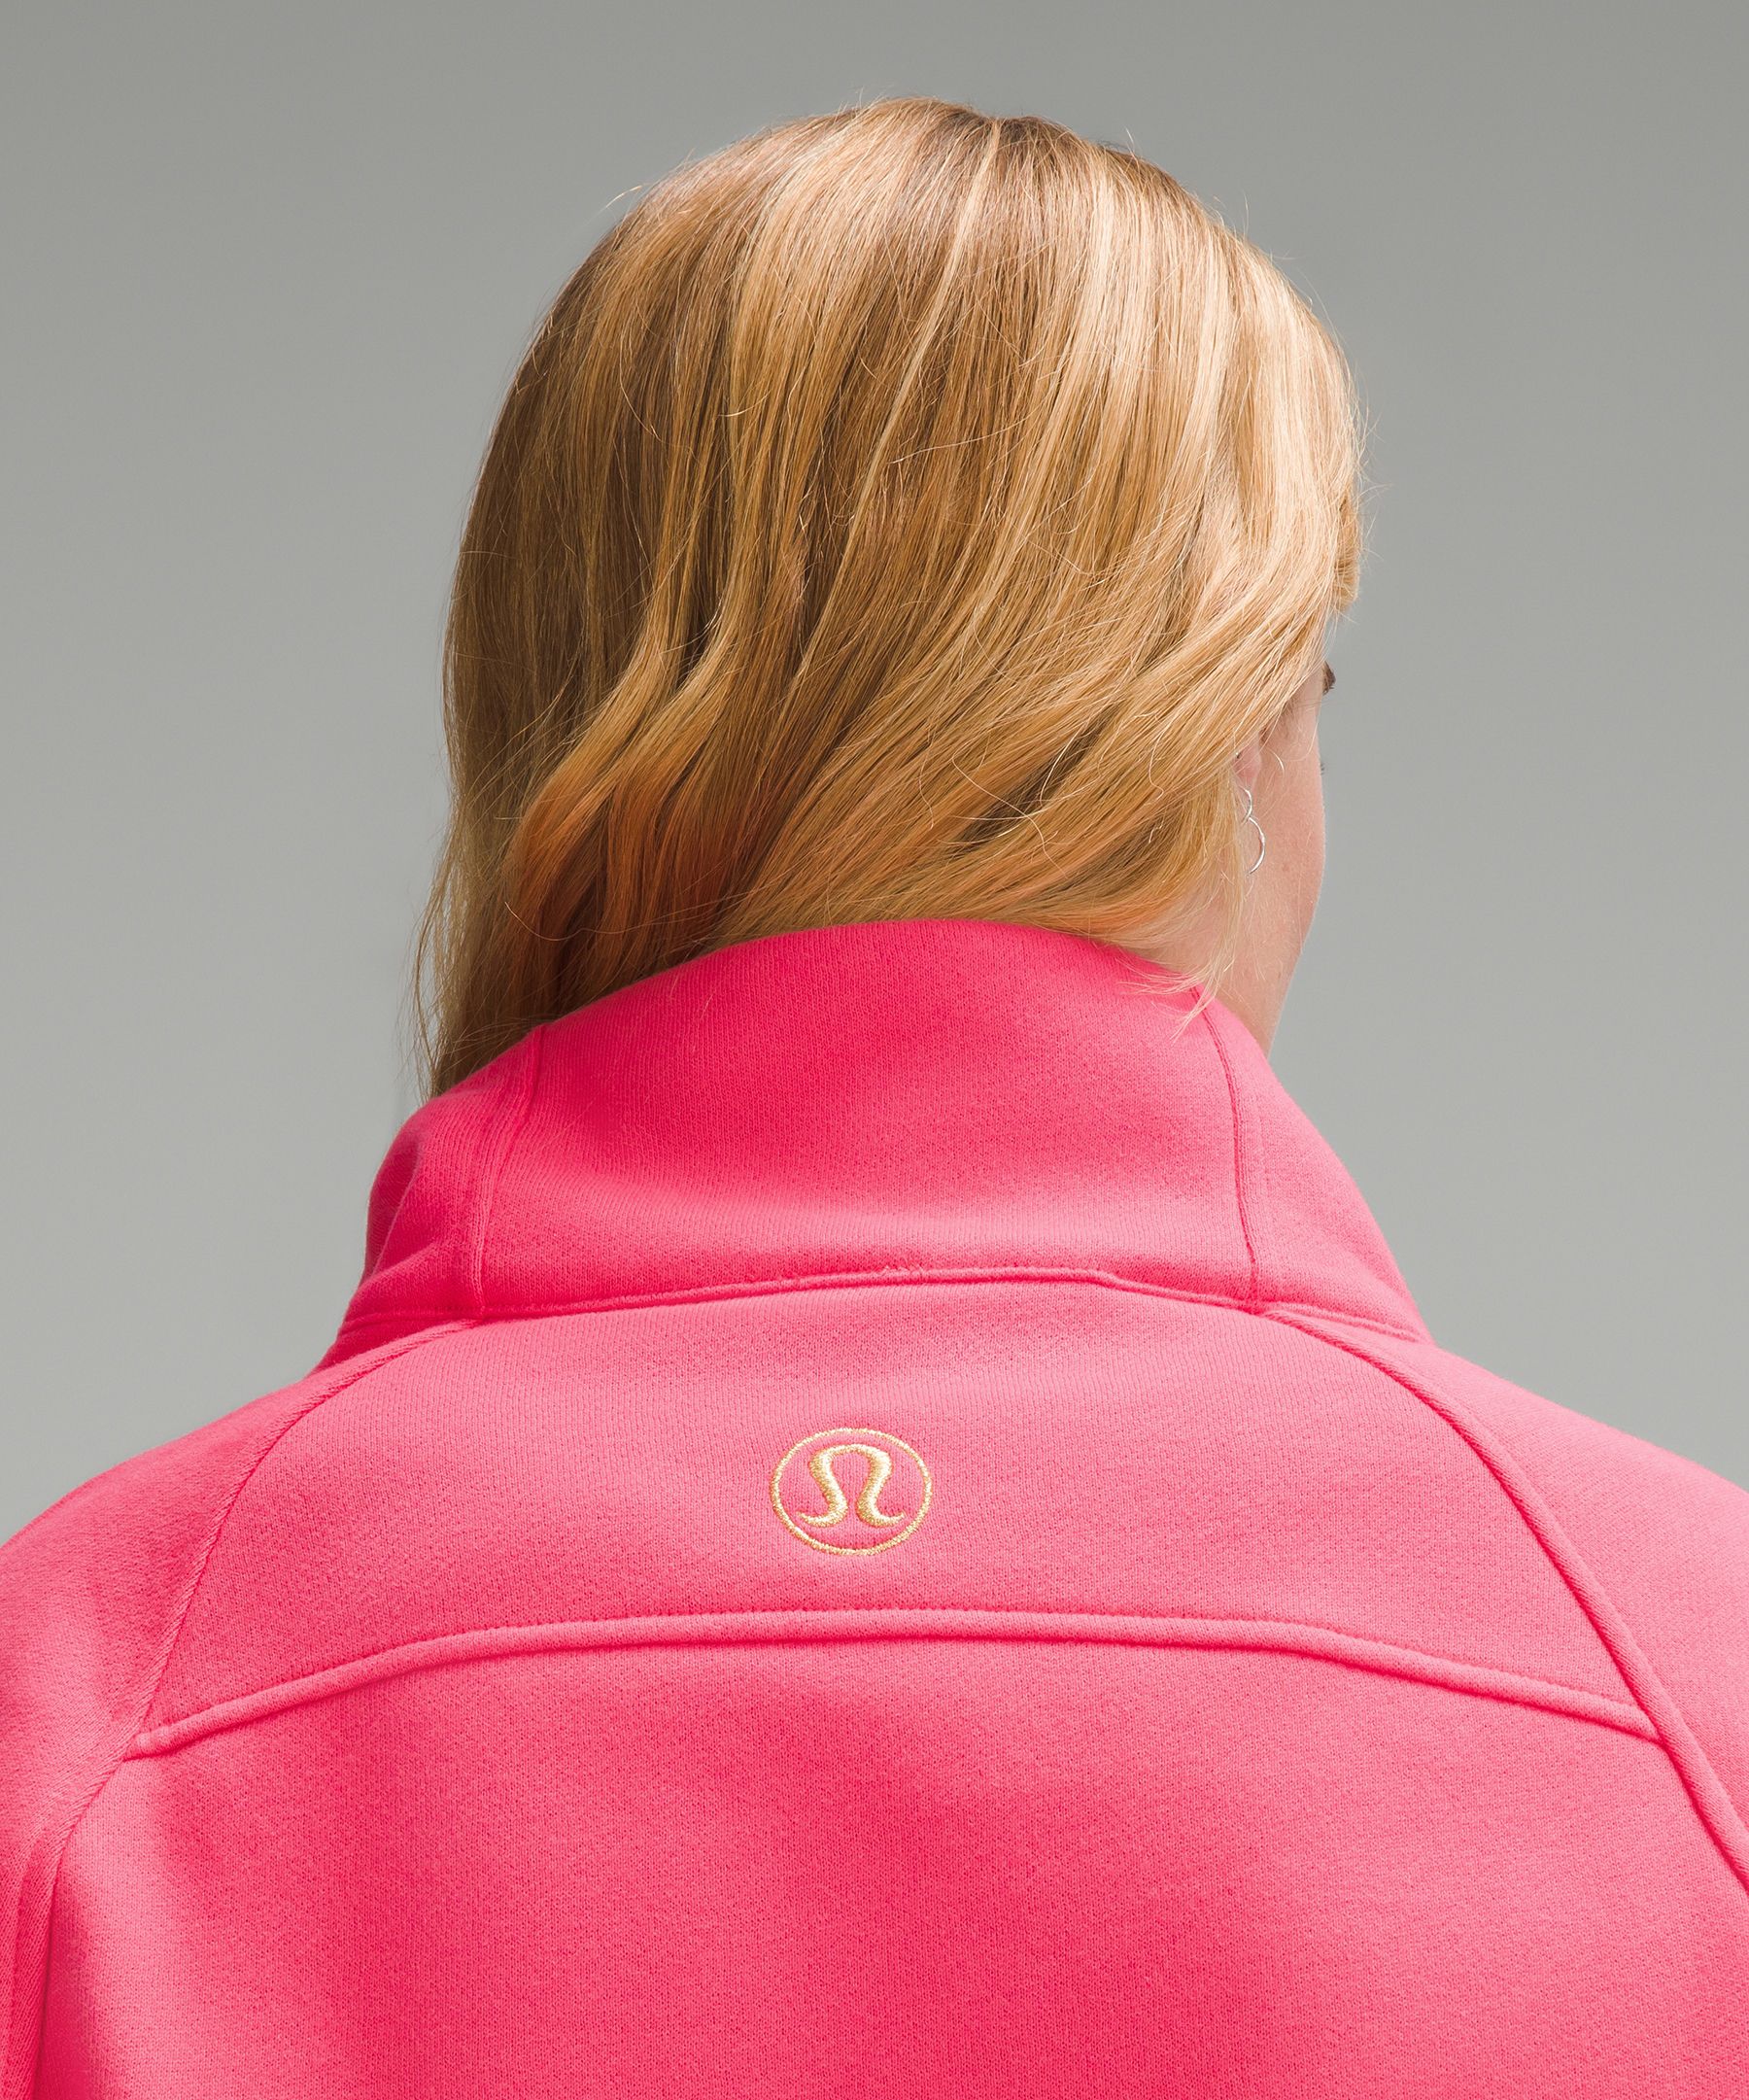 A quick look at the new Lululemon Twilight Rose Scuba Funnel Neck #lul